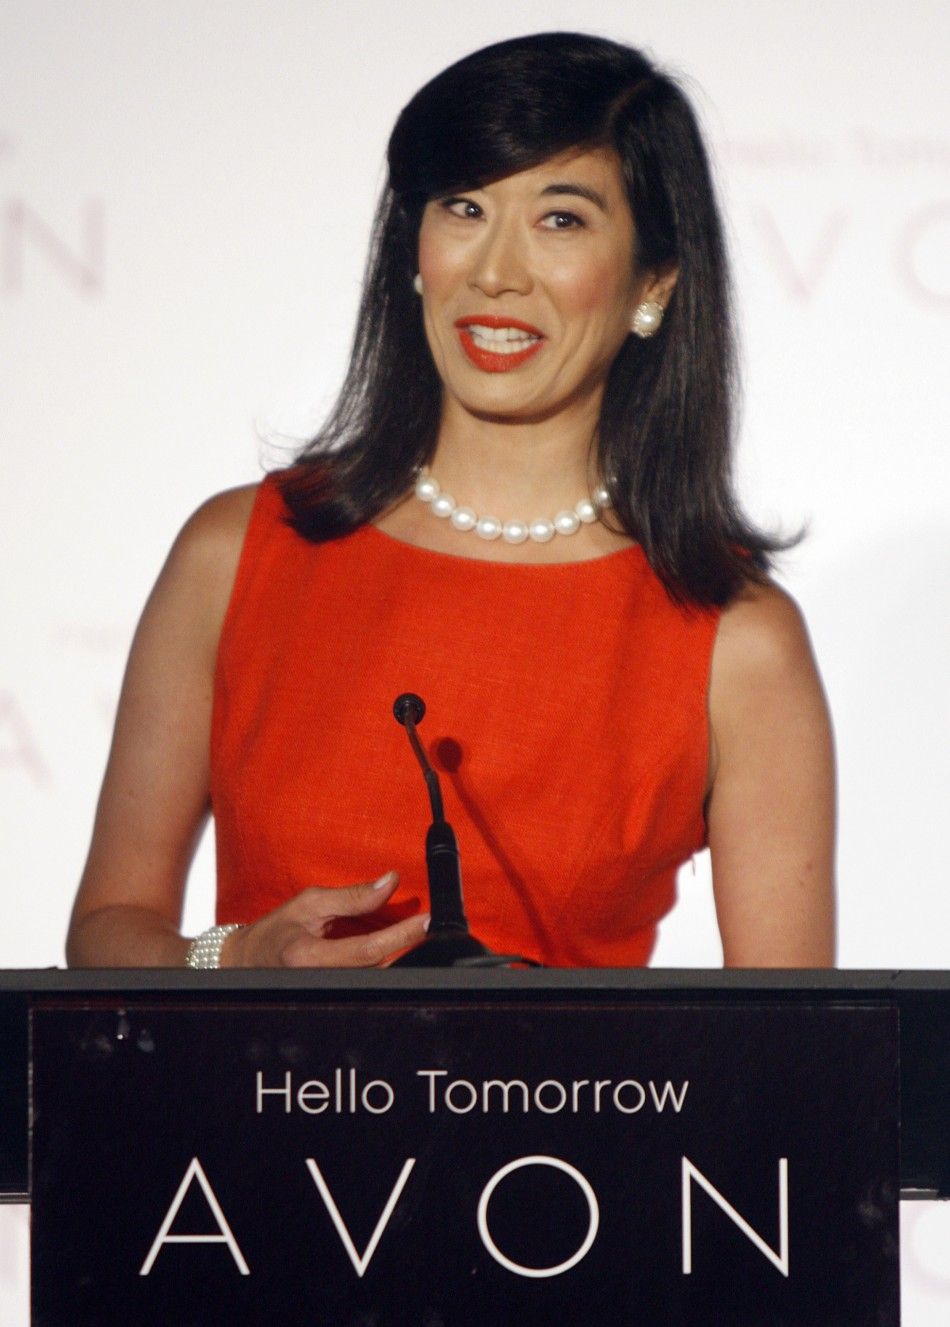 Andrea Jung, chairman and CEO of Avon Products, Inc., announces that actress Reese Witherspoon will serve as Avons first ever Global Ambassador during a news conference in Beverly Hills, California August 1, 2007.